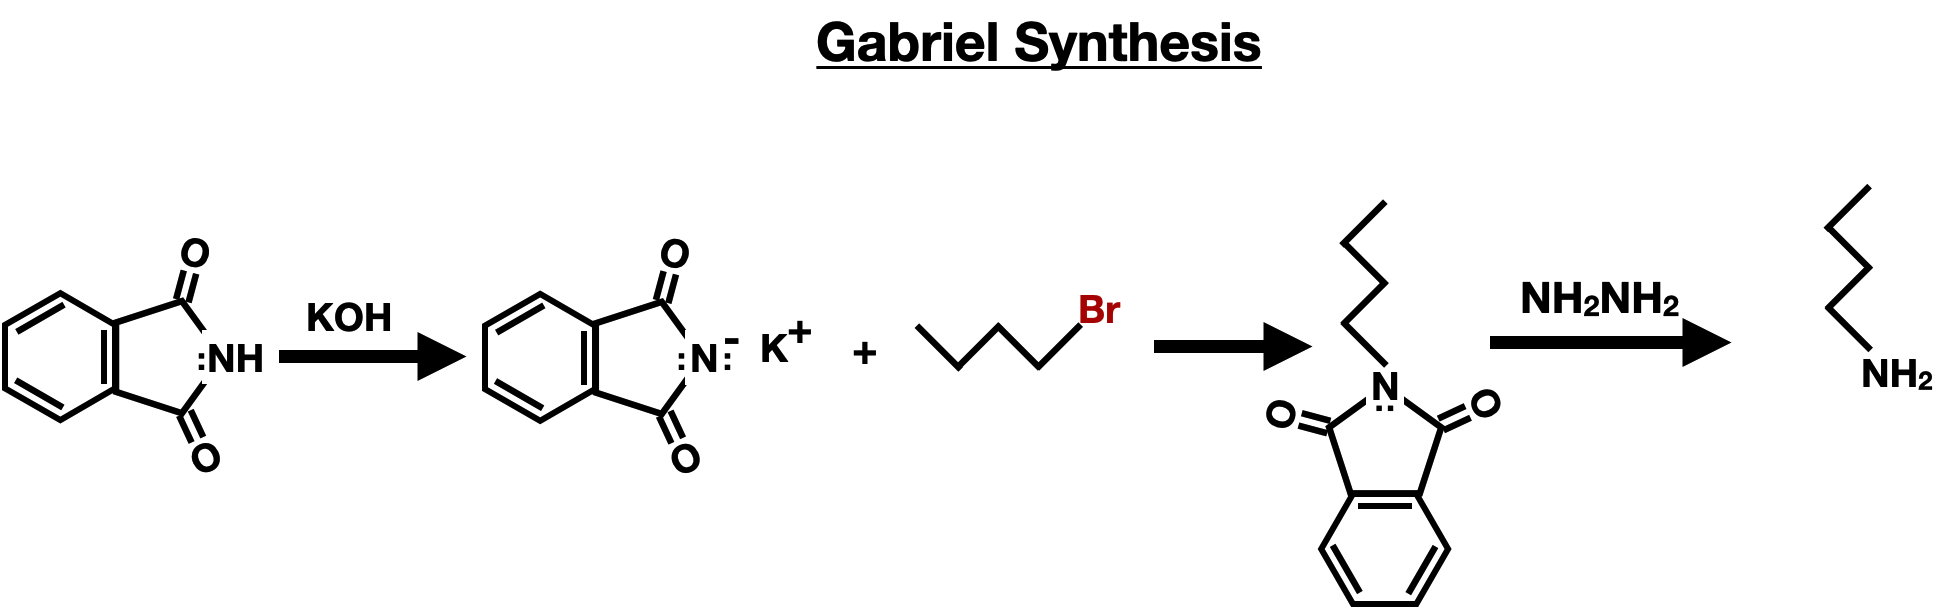 Amino Acid Synthesis and Protection Reactions - gabriel synthesis koh reaction